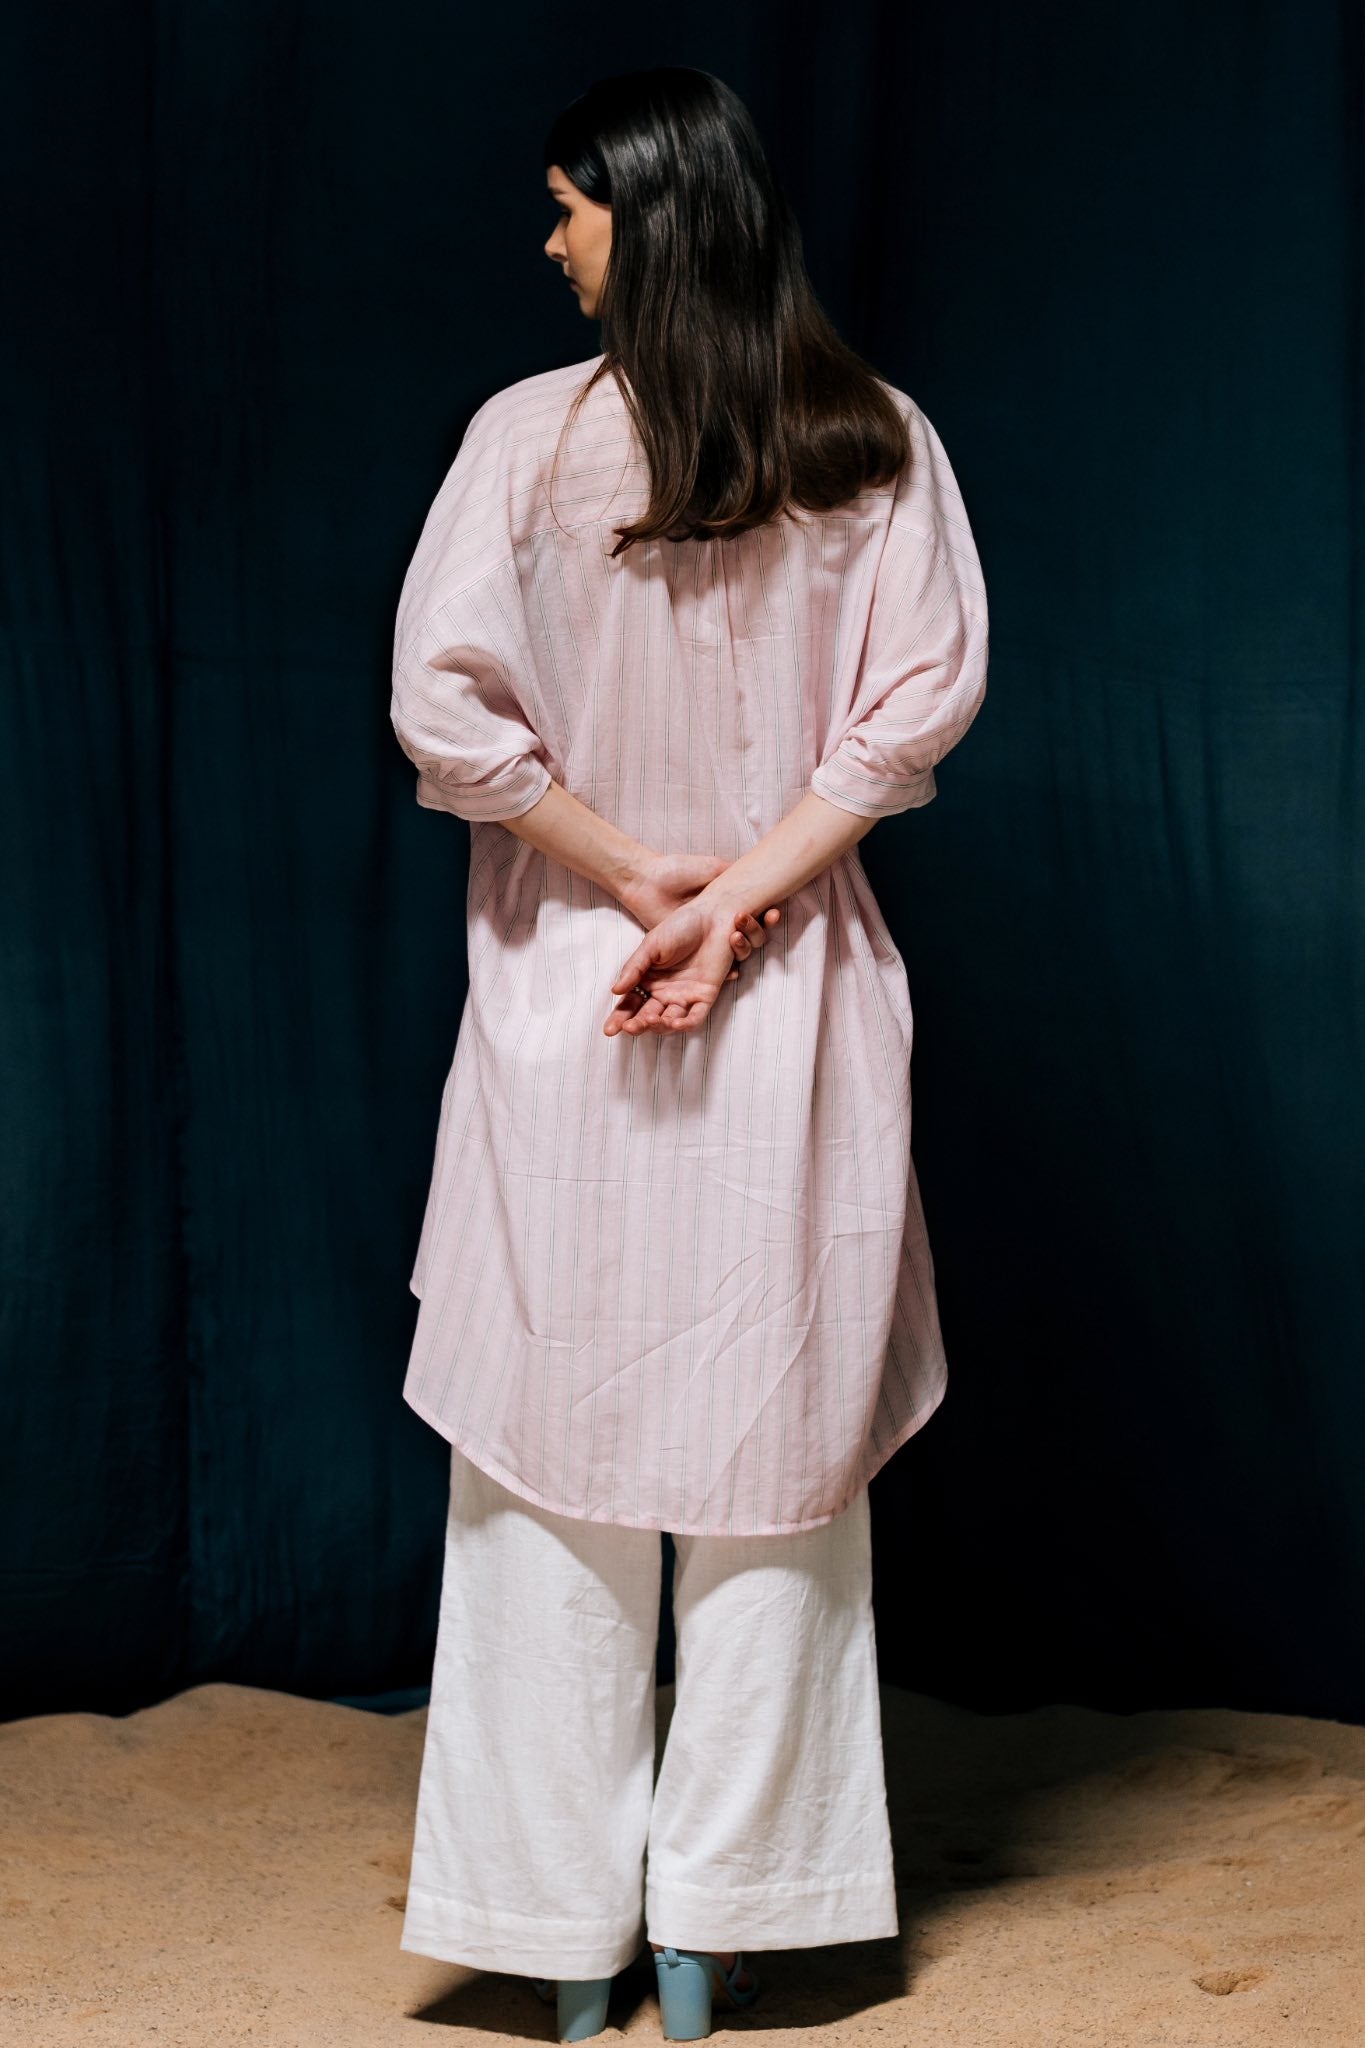 Suman Pink Tunic Shirt, Short front & Long back with cuffs and a bow - Back